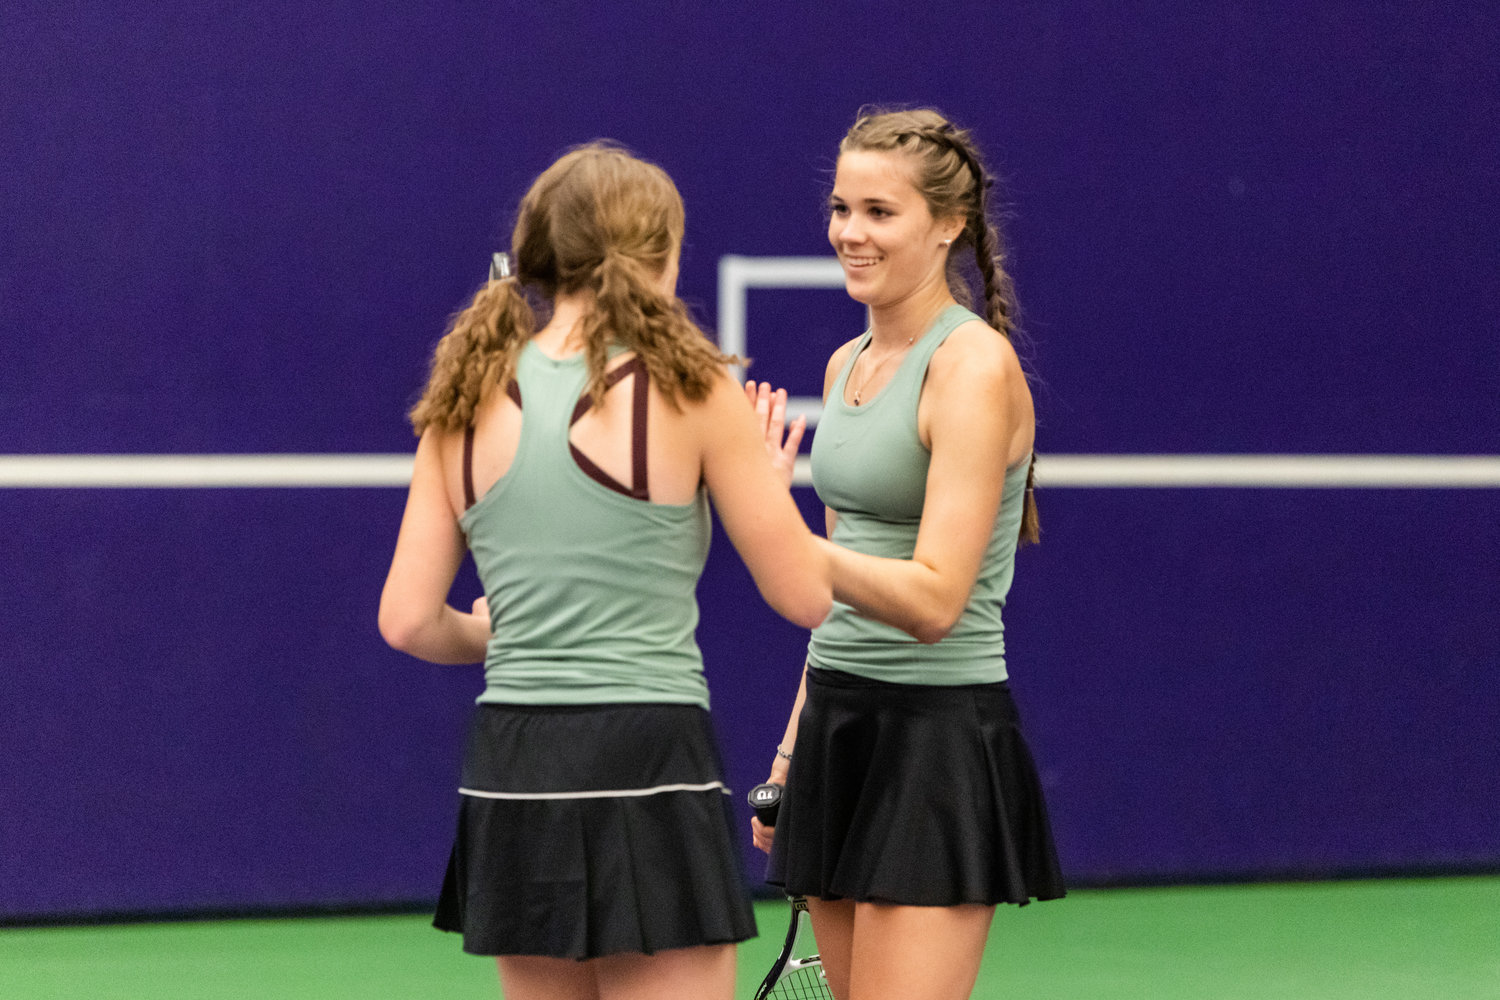 Centralia's Elizabeth Hopkins (left) and Maddie Corwin (right) high-five during the first set of the 2A girls' doubles tennis state competition on May 27, 2022.